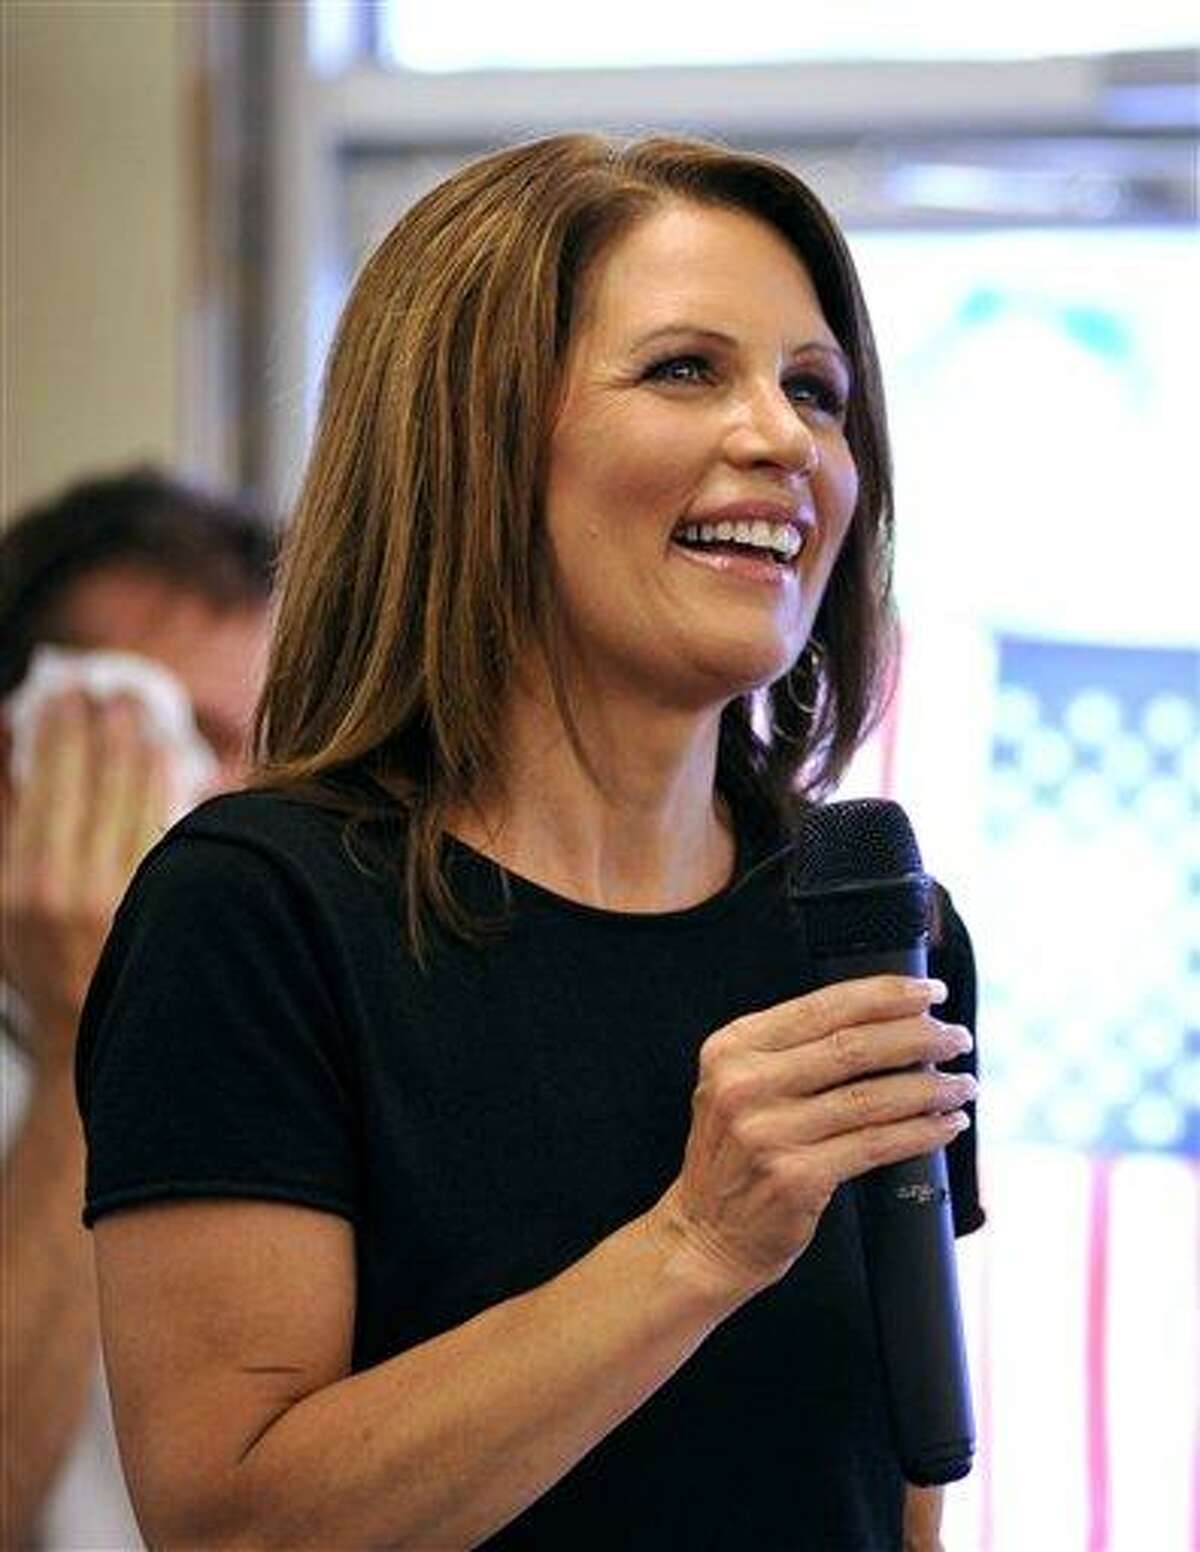 In this Aug. 26, 2011 file photo, Presidential candidate U.S. Rep. Michele Bachmann, R-Minn., speaks to supporters during a campaign stop at Angie's Subs, in Jacksonville Beach, Fla. Sentinel, a conservative imprint of Penguin Group (USA), announced Monday, Aug. 29, that the Bachmann's memoir will arrive in November and already has been completed. The book, reports of which first circulated in June, is currently untitled. (AP Photo/Rick Wilson, file)